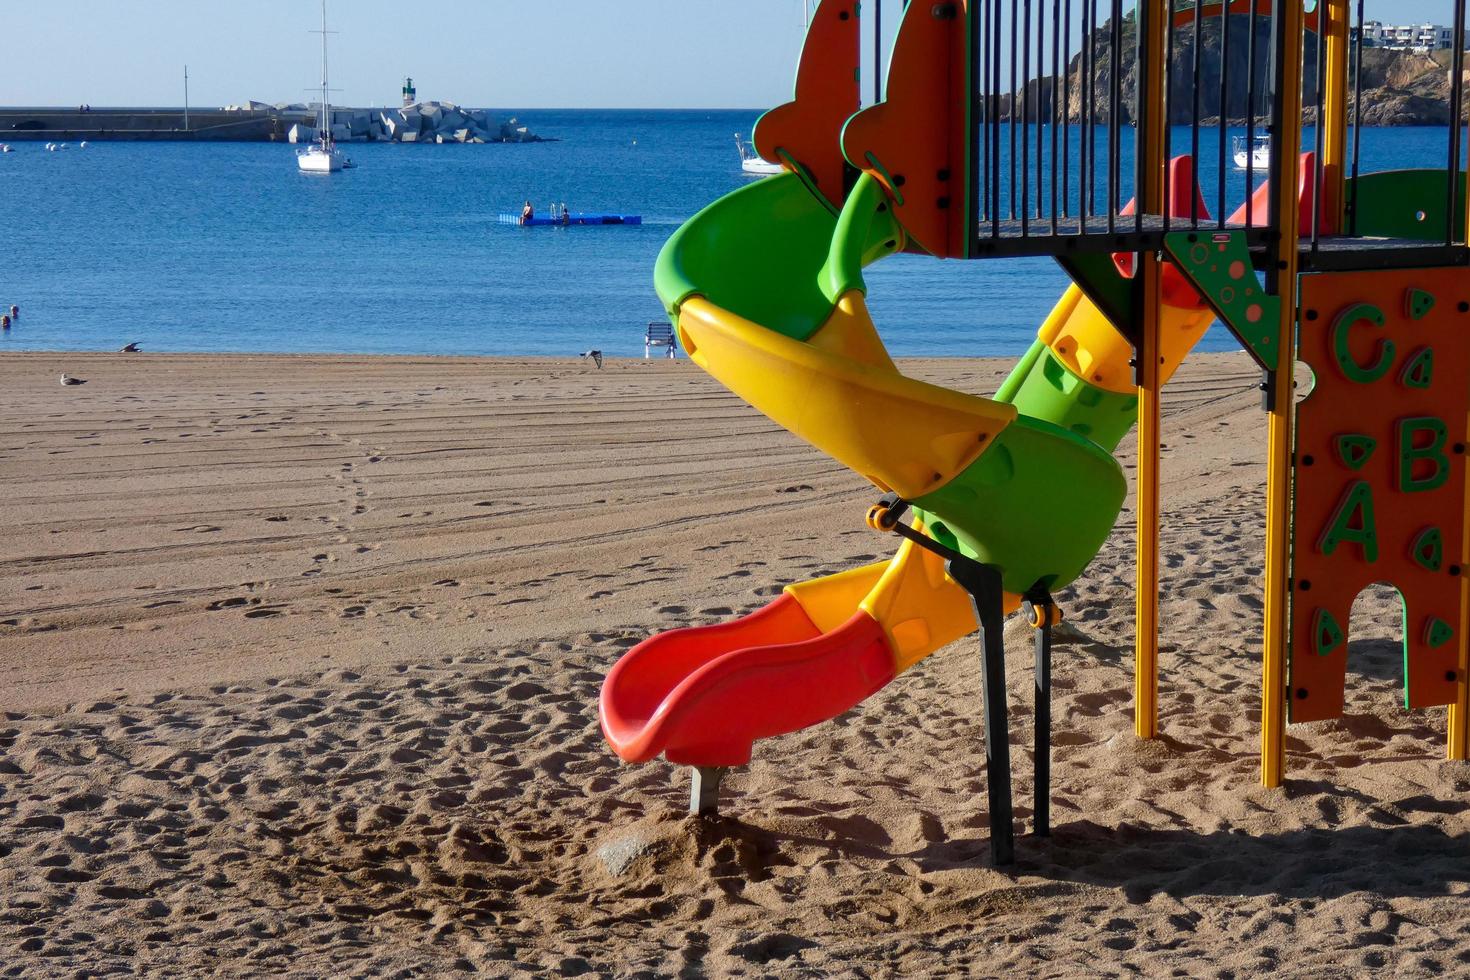 Colorful slide on the sand of the beach, children's games photo